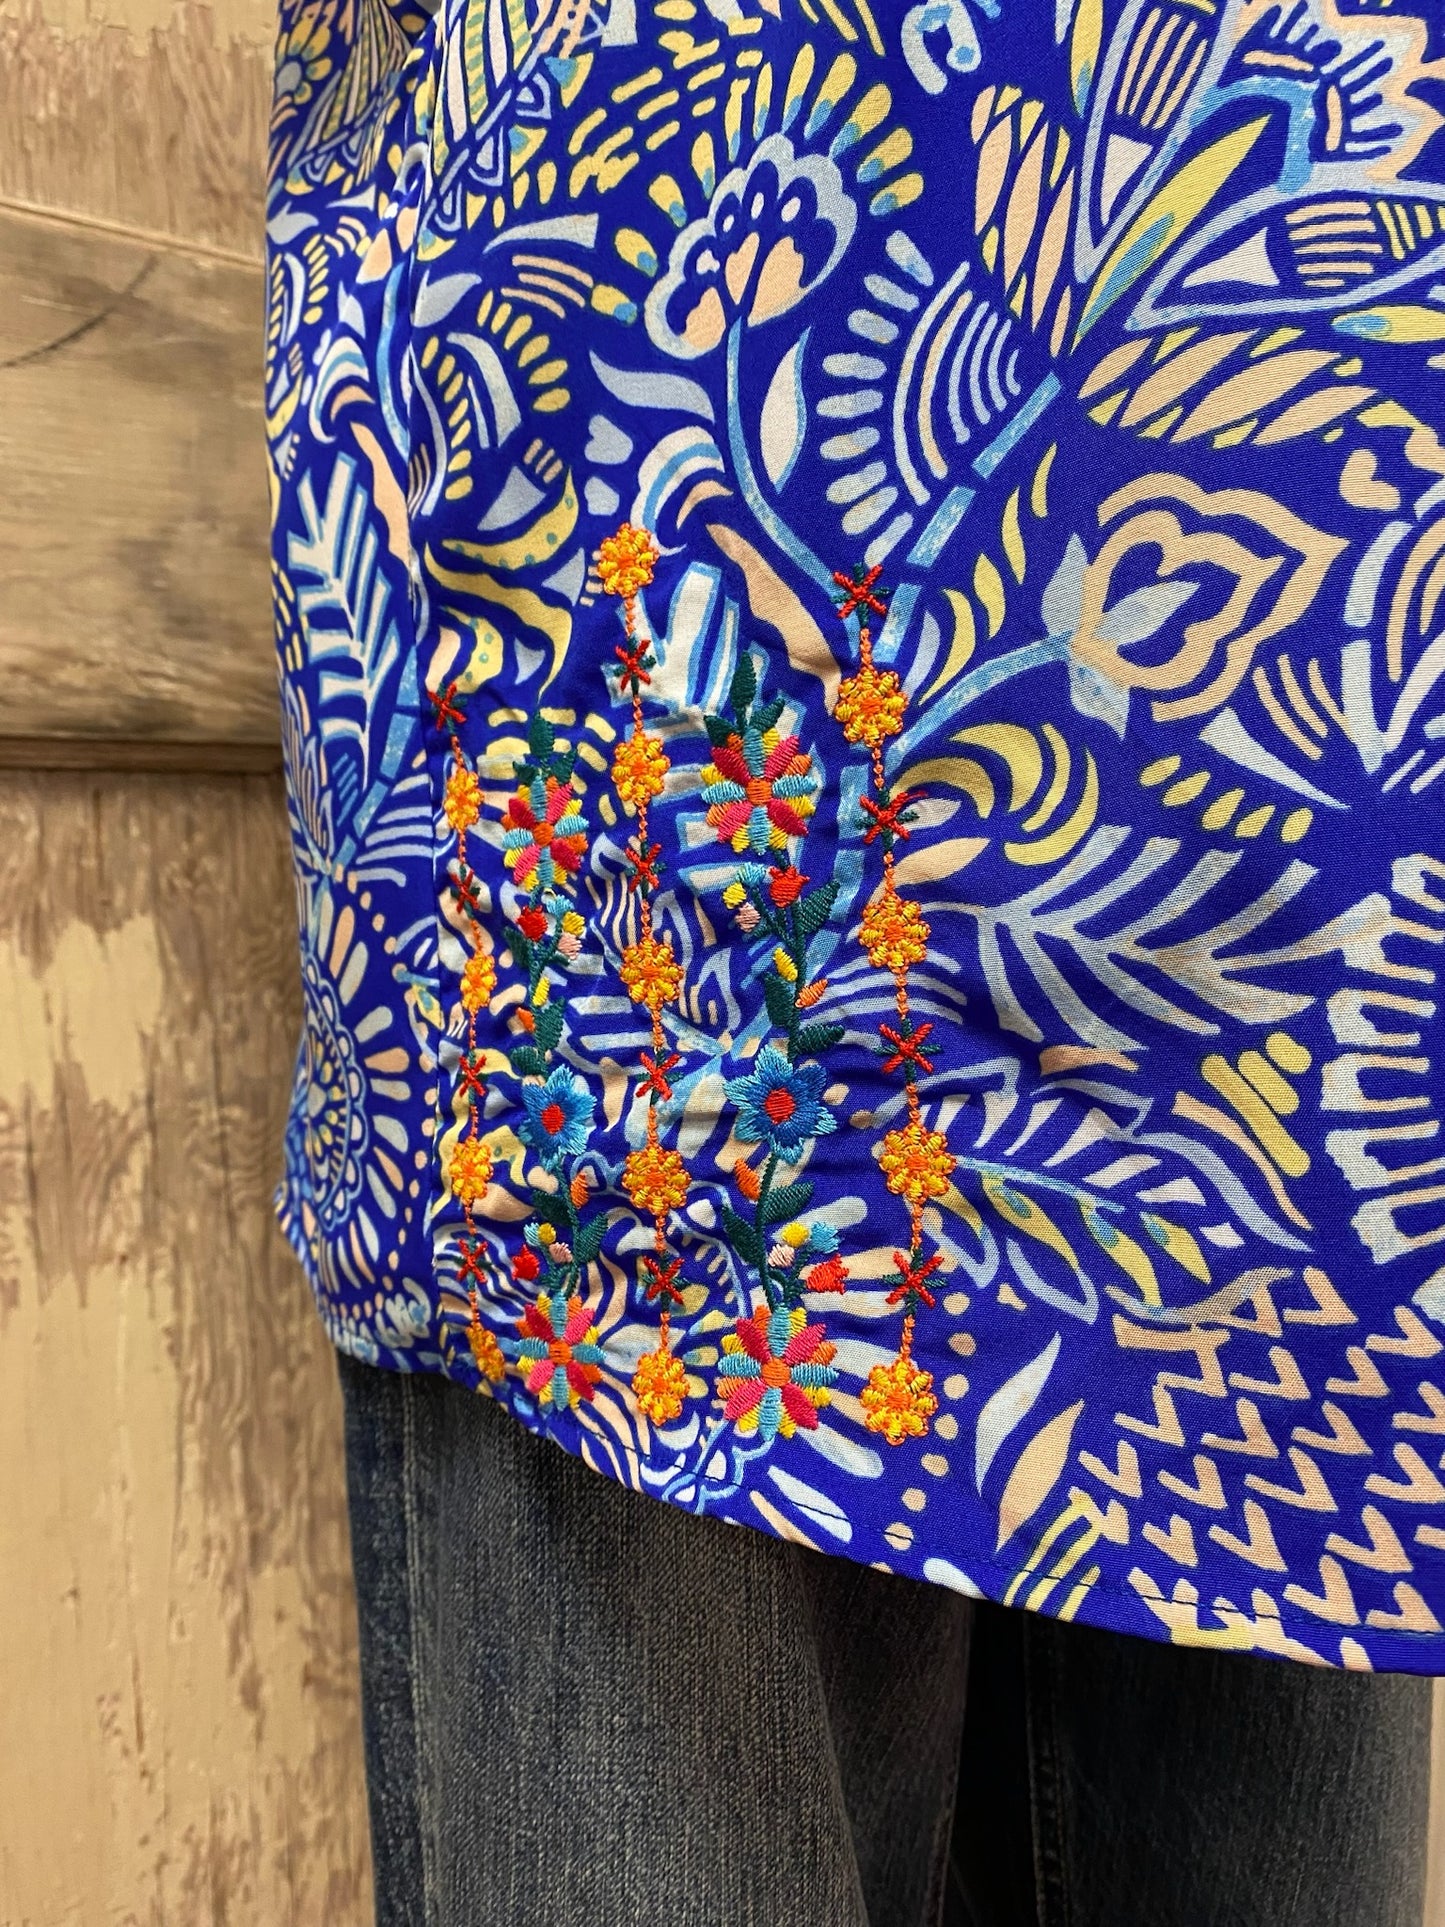 Royal Blue Embroidered Top | S-3XL